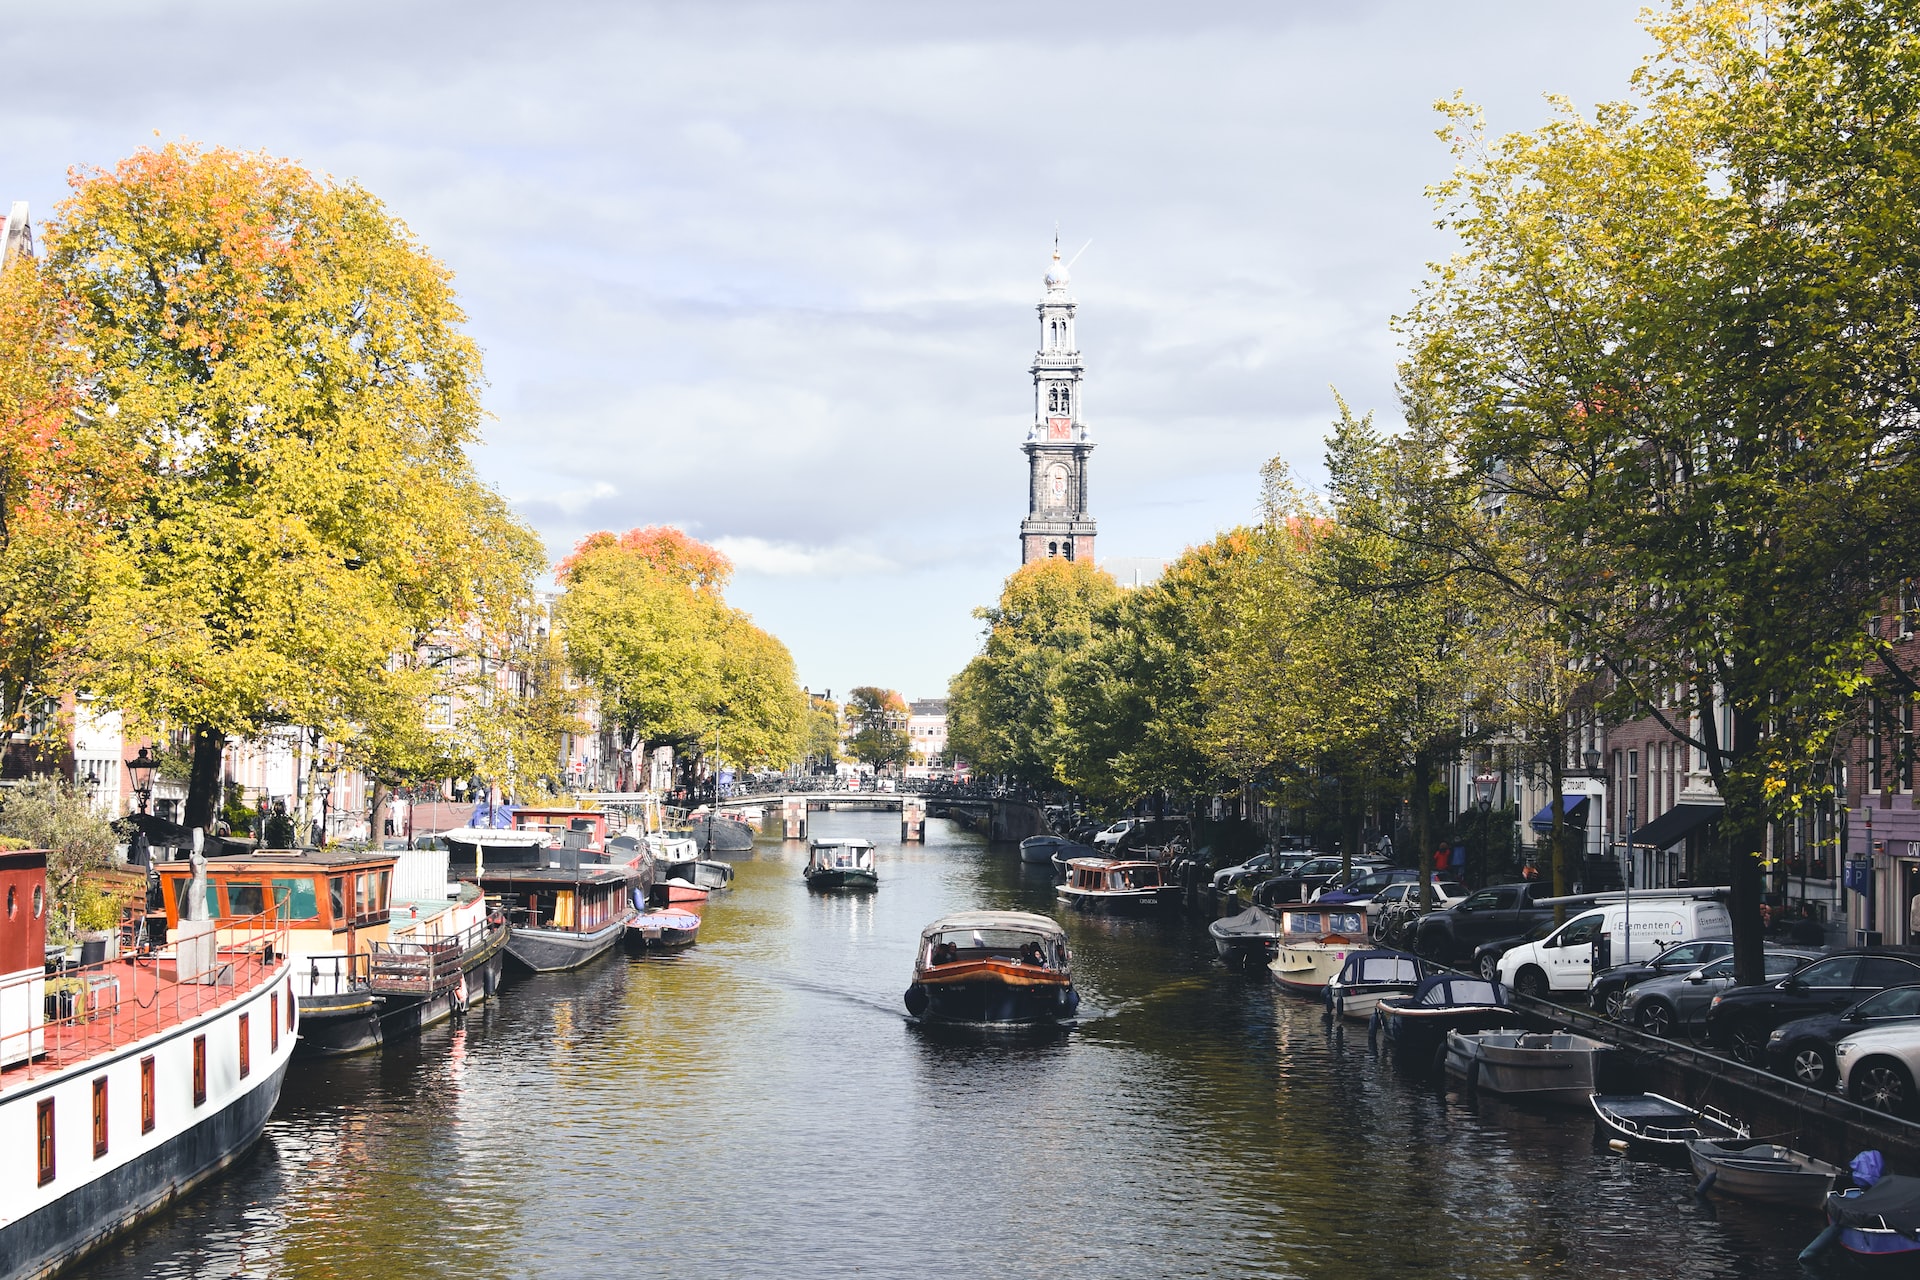 A boat saild down a canal in Amsterdam, which is lined with boats, in warm weather.